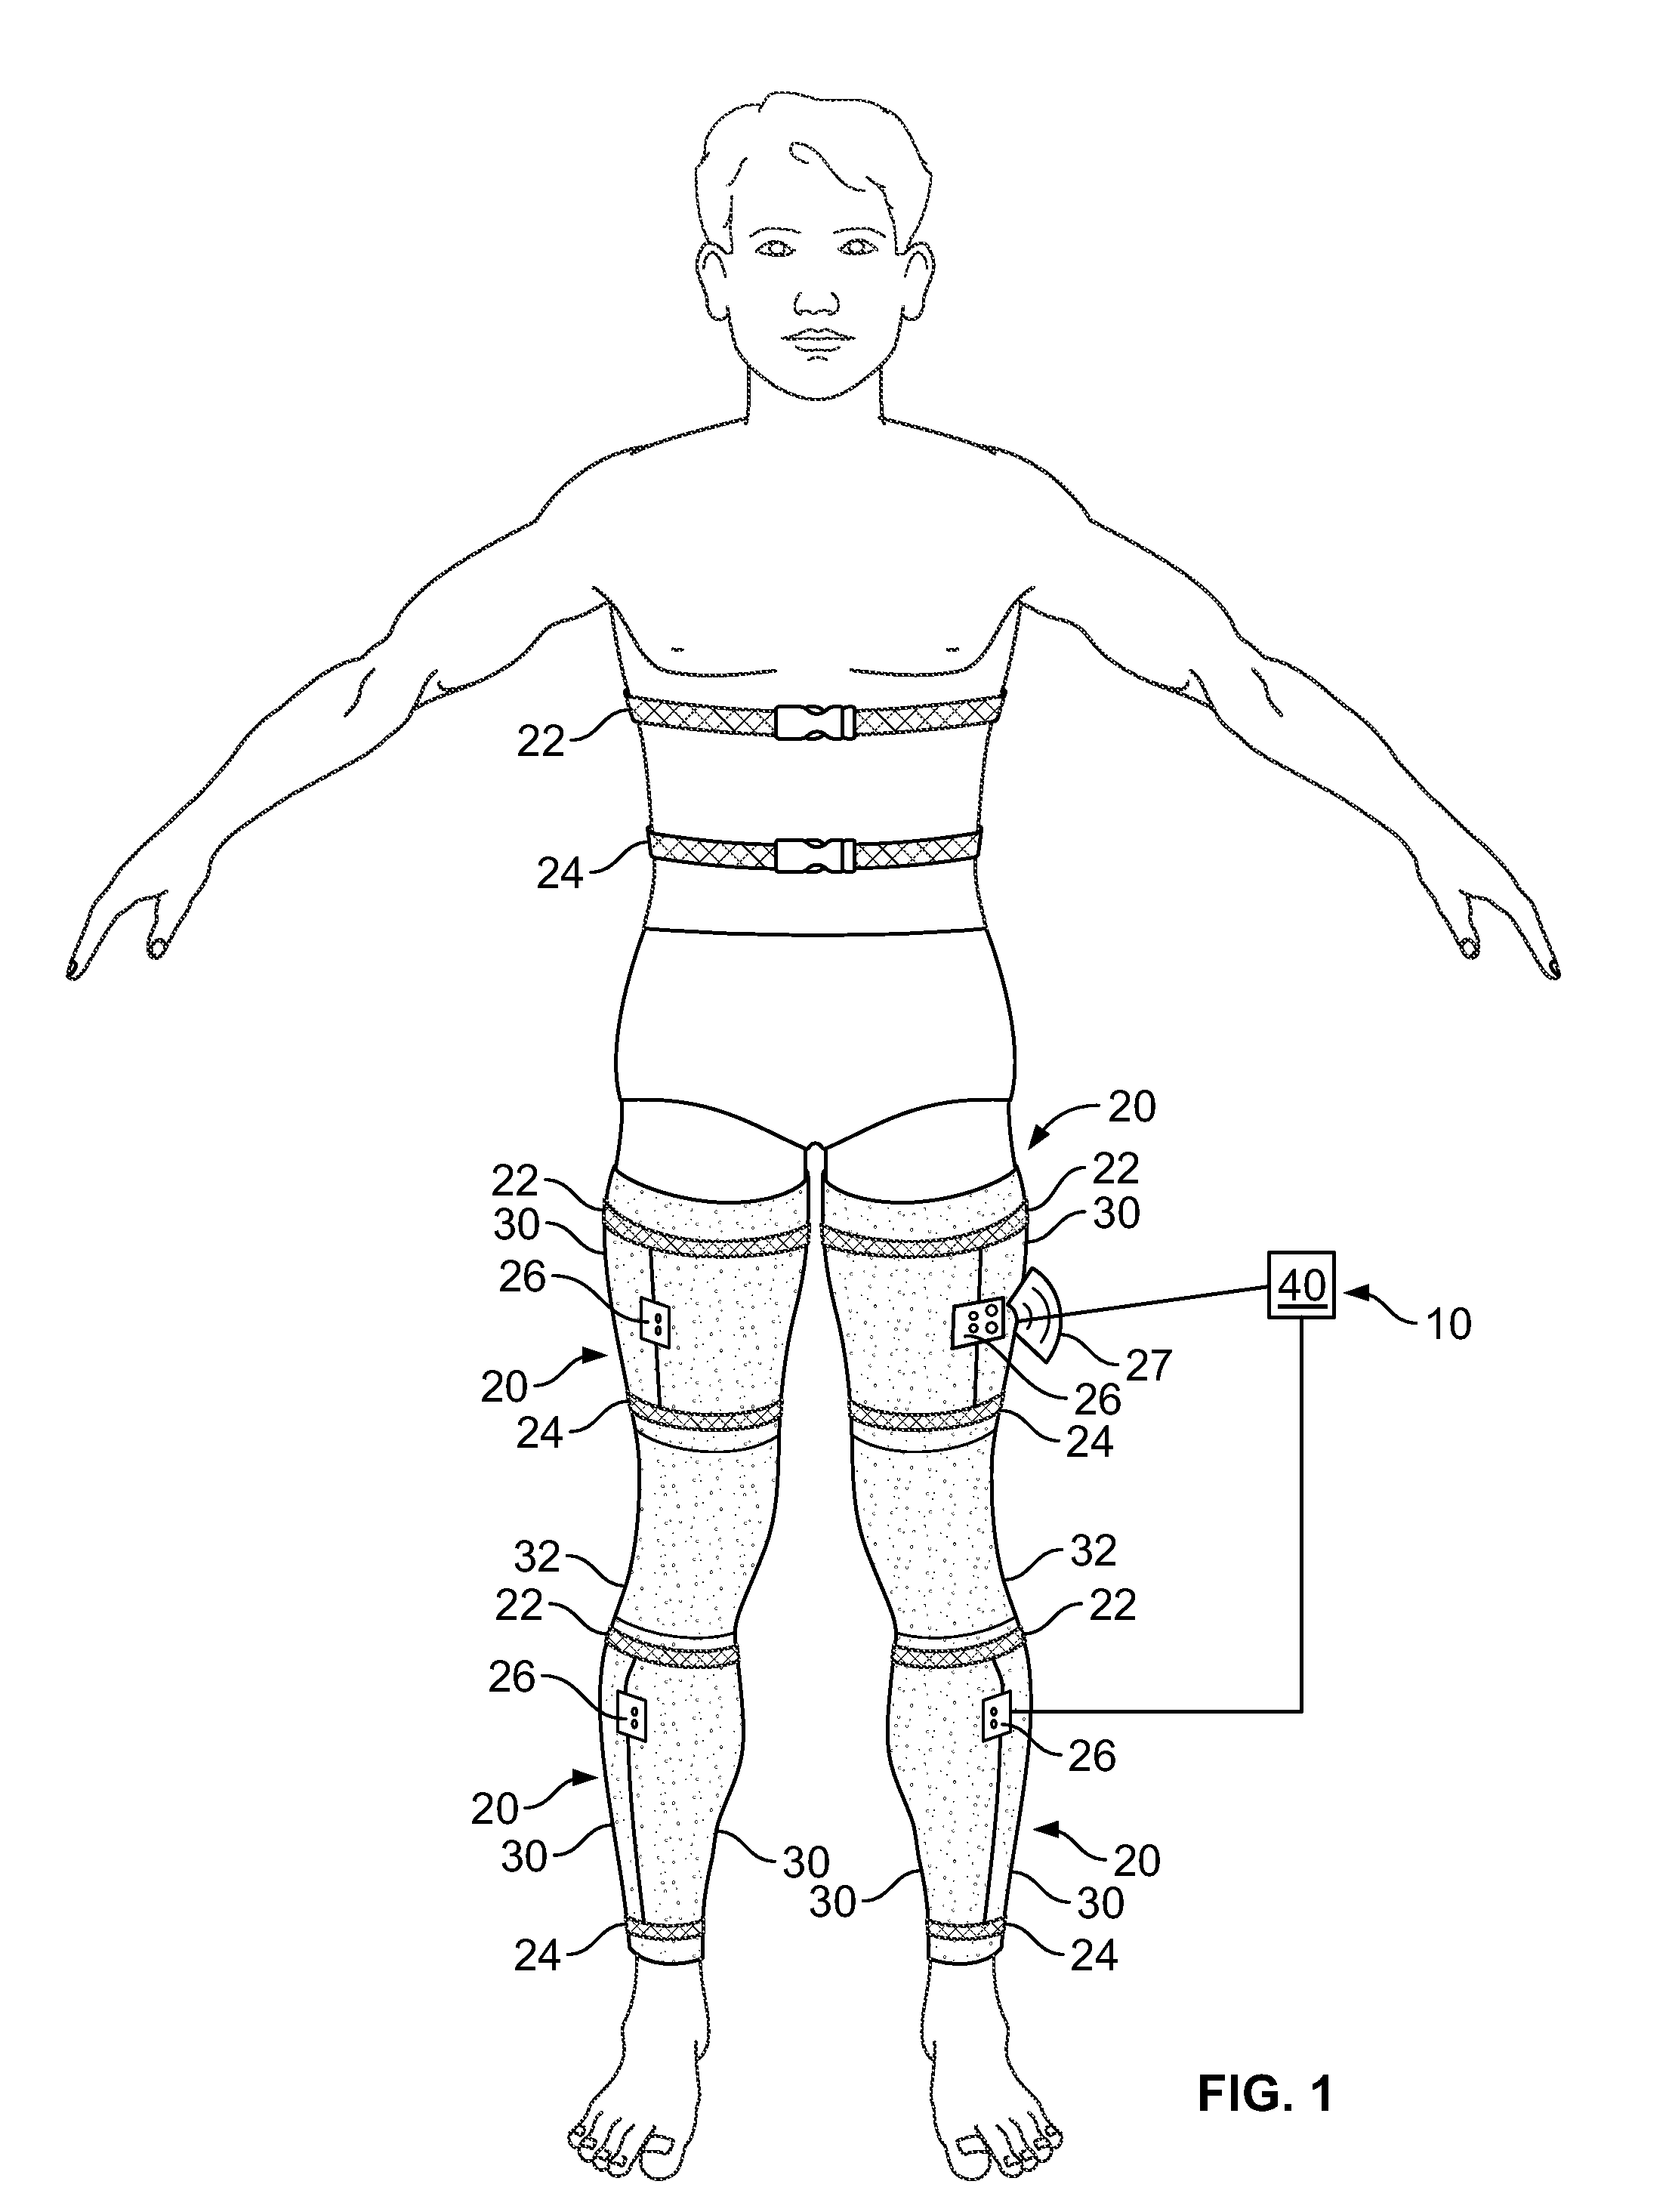 System for using electrical muscle stimulation to increase blood flow in body parts